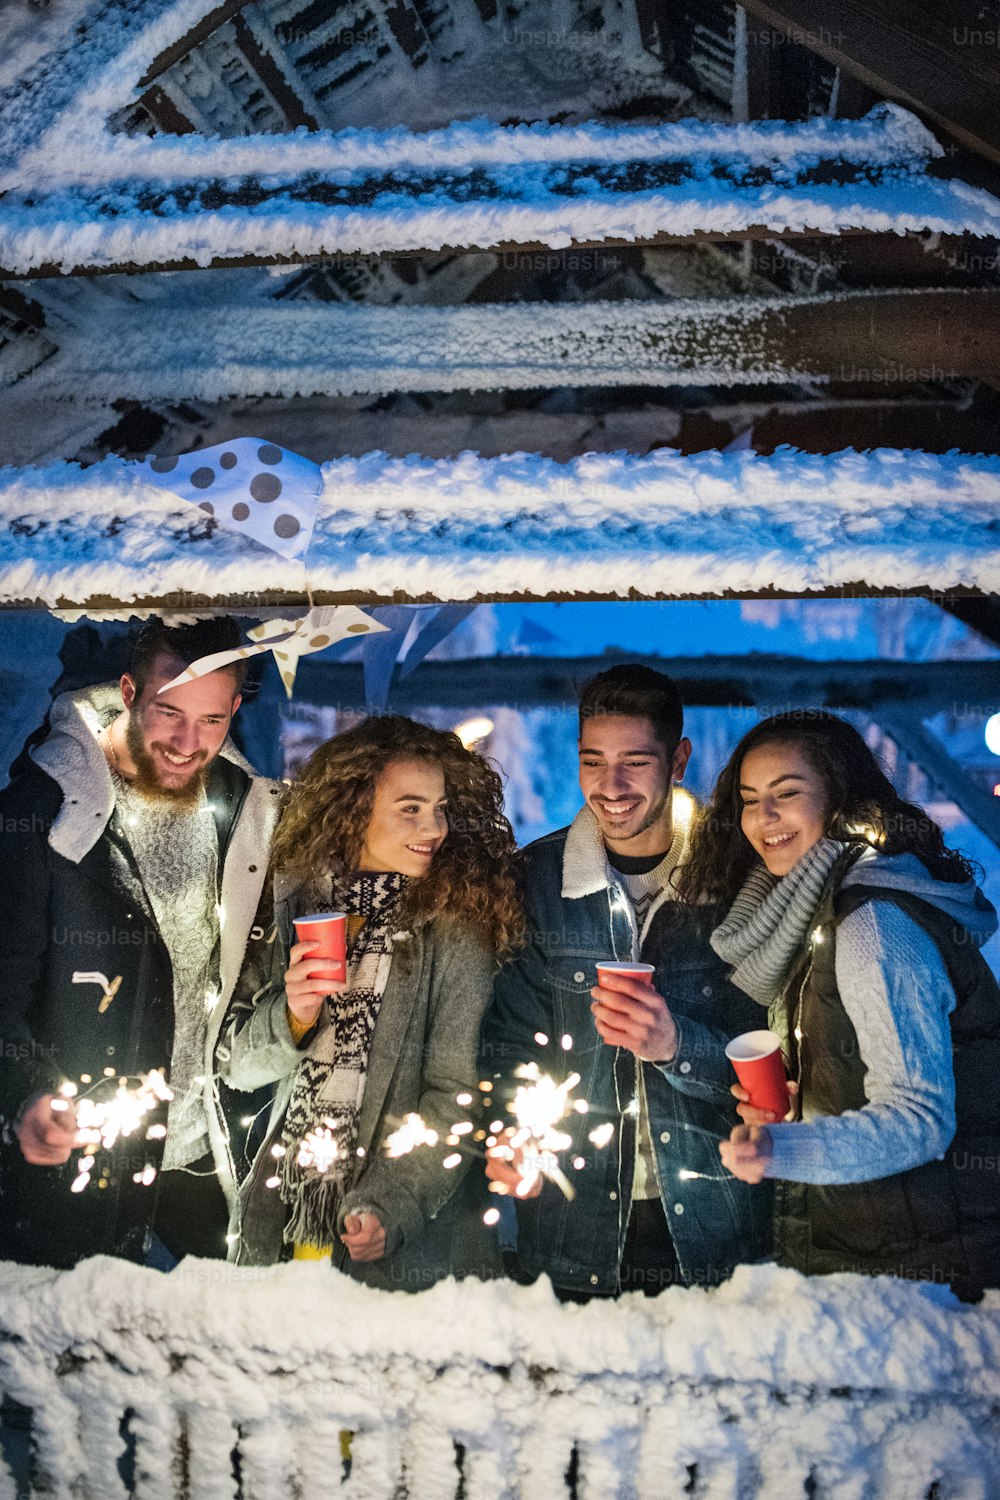 A group of young friends outdoors in snow in winter at night, holding sparklers.